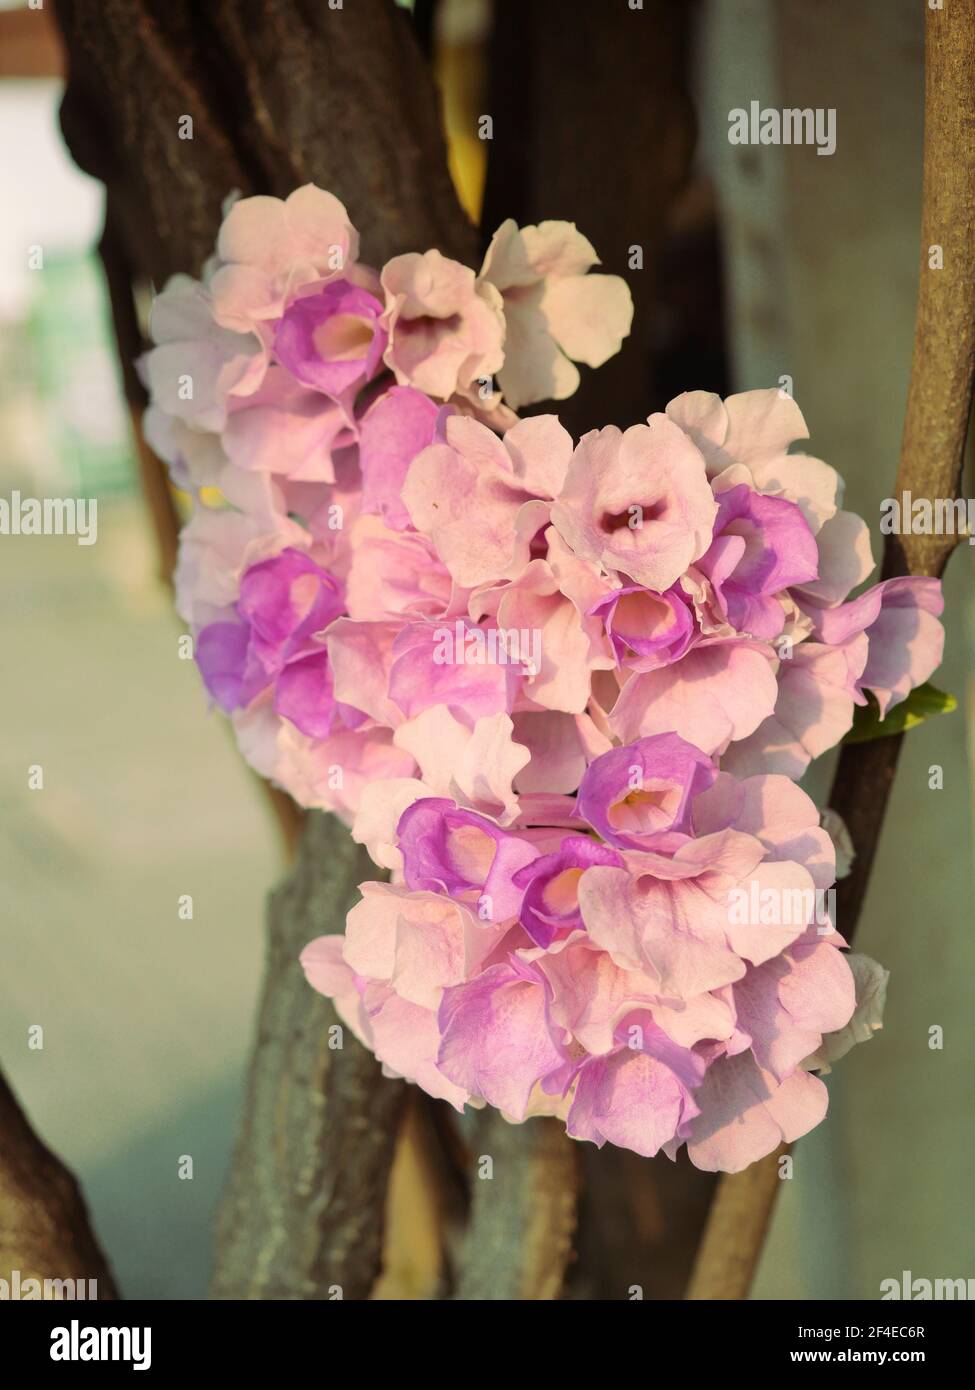 Garlic Vine ( Mansoa alliacea ) blossom on tree plant, Purple and pink petals of tropical flowers Stock Photo